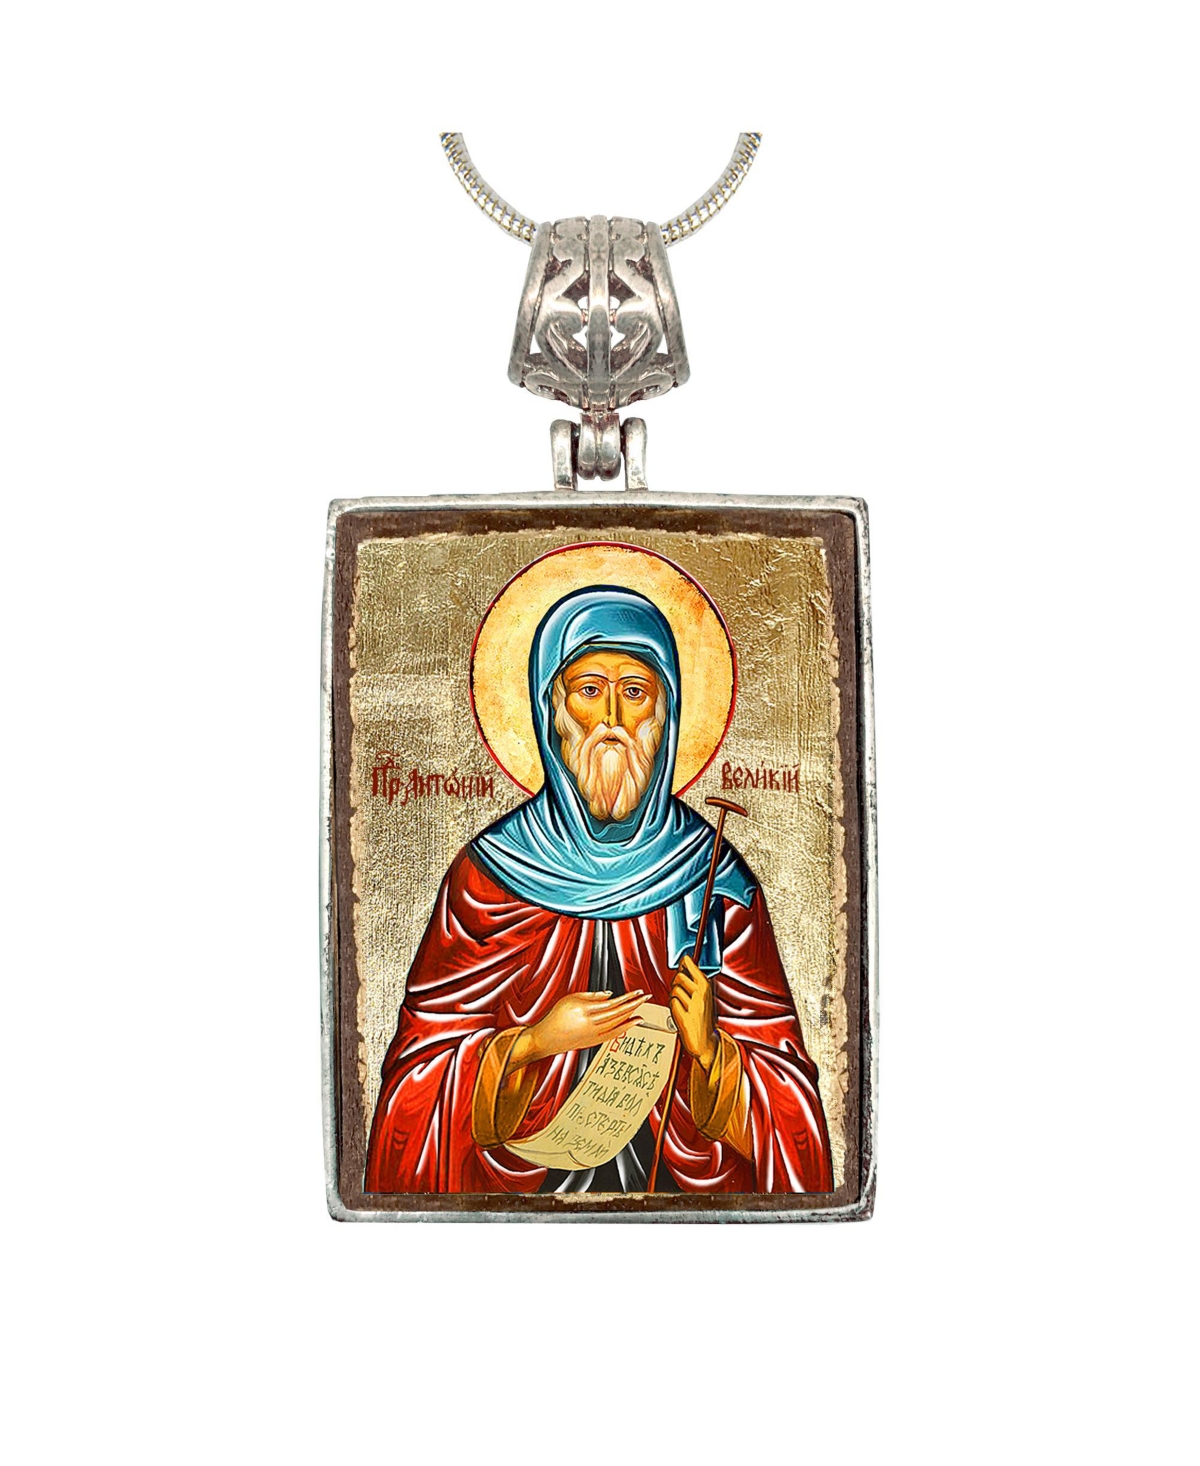 Saint Anthony Religious Holiday Jewelry Necklace Monastery Icons - Multi Color